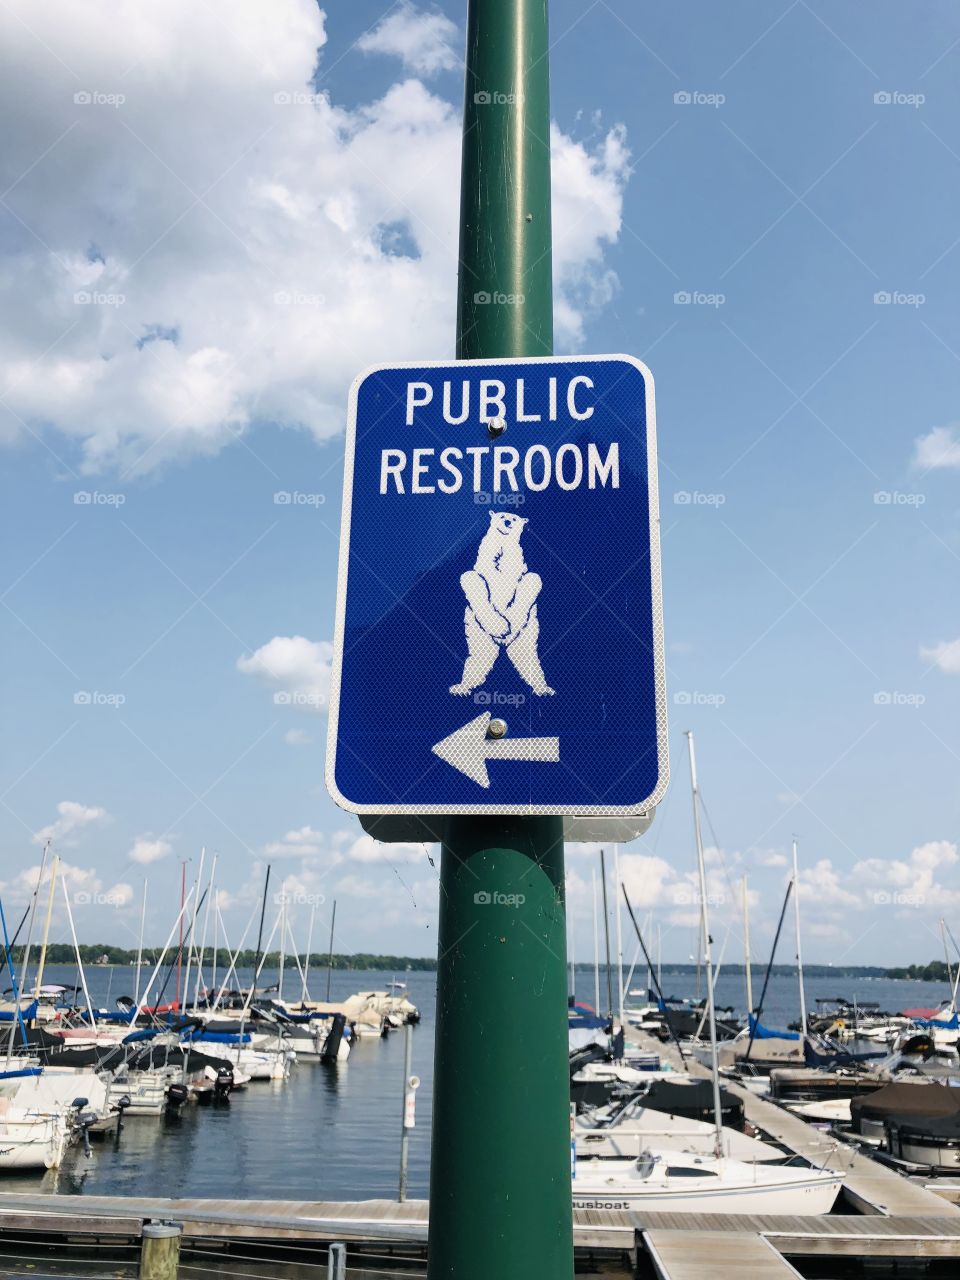 A clever restroom sign in White Bear Lake, Minnesota.